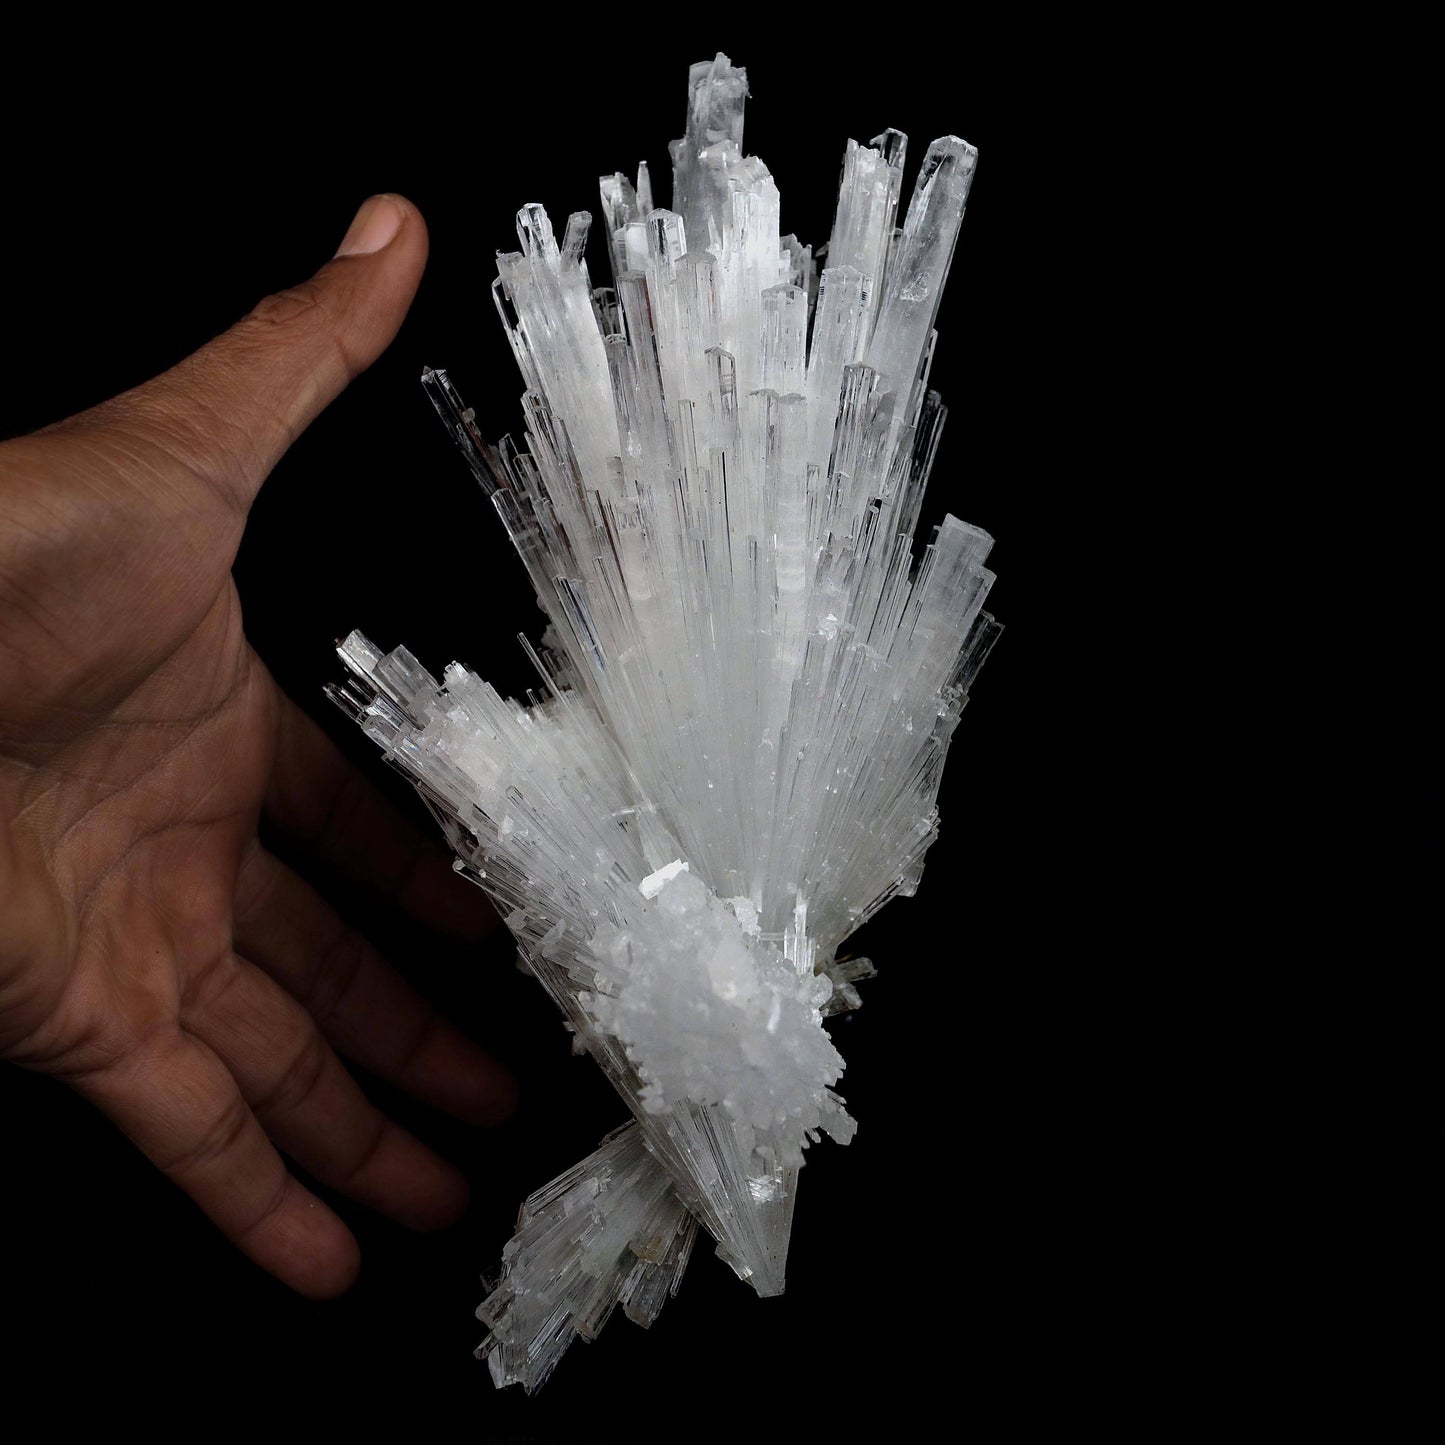 Scolecite Glassy Spray Natural Mineral Specimen # B 4608  https://www.superbminerals.us/products/scolecite-glassy-spray-natural-mineral-specimen-b-4608  Features: A large, tapered spray of elongated colorless Scolecite crystals. The Scolecite crystals are glassy and highly translucent with transparent terminations. A beautiful specimen in excellent condition.Primary Mineral(s): Scolecite